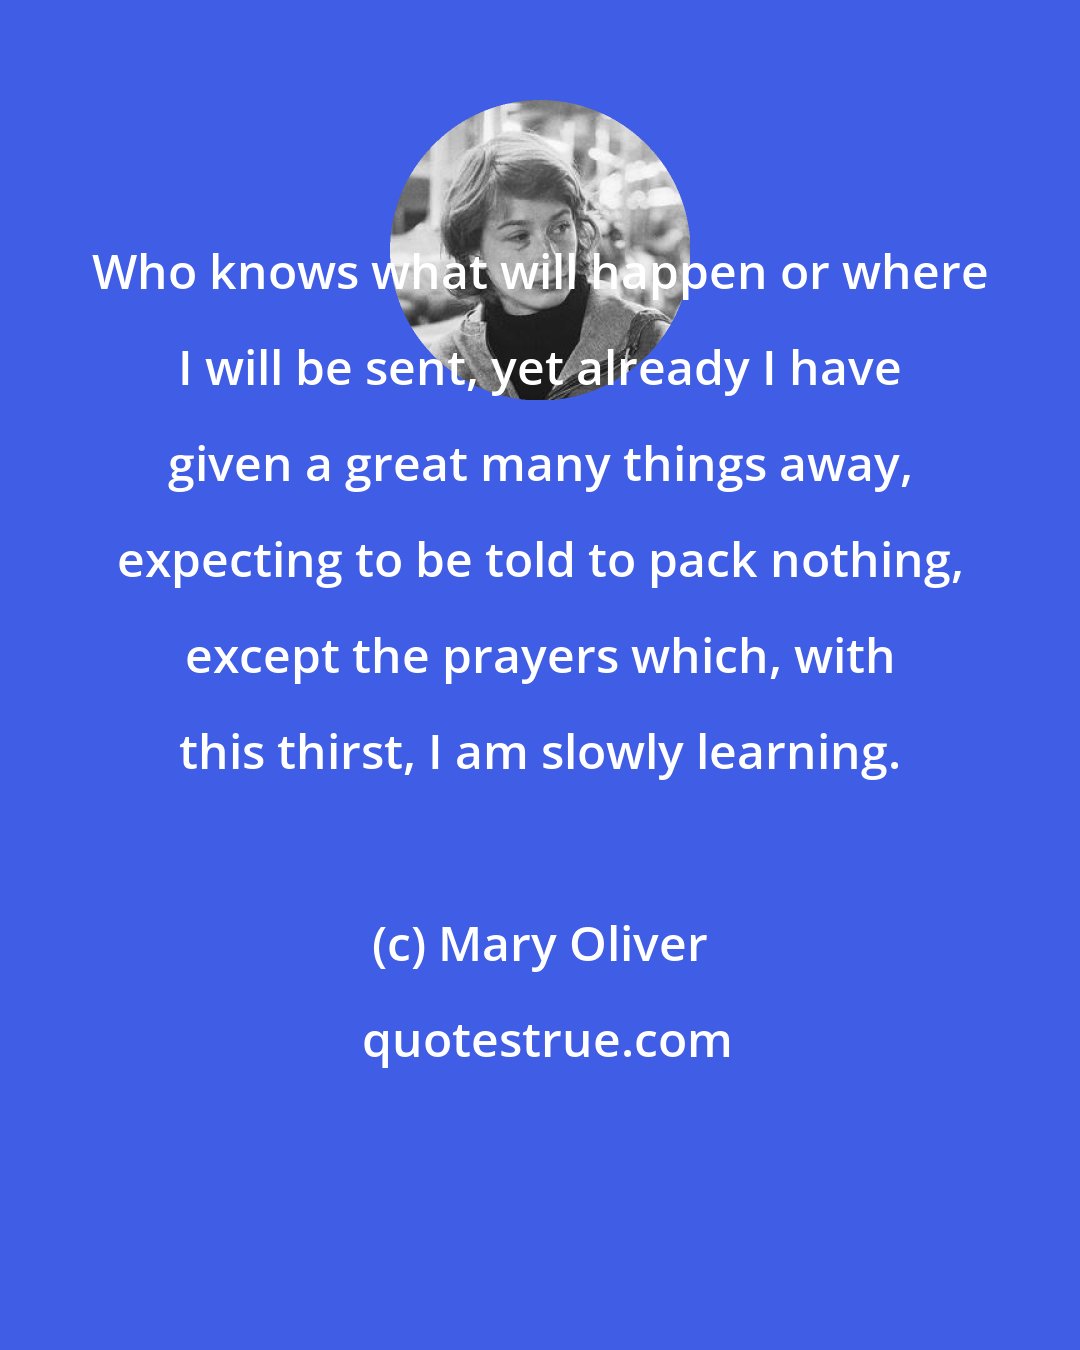 Mary Oliver: Who knows what will happen or where I will be sent, yet already I have given a great many things away, expecting to be told to pack nothing, except the prayers which, with this thirst, I am slowly learning.